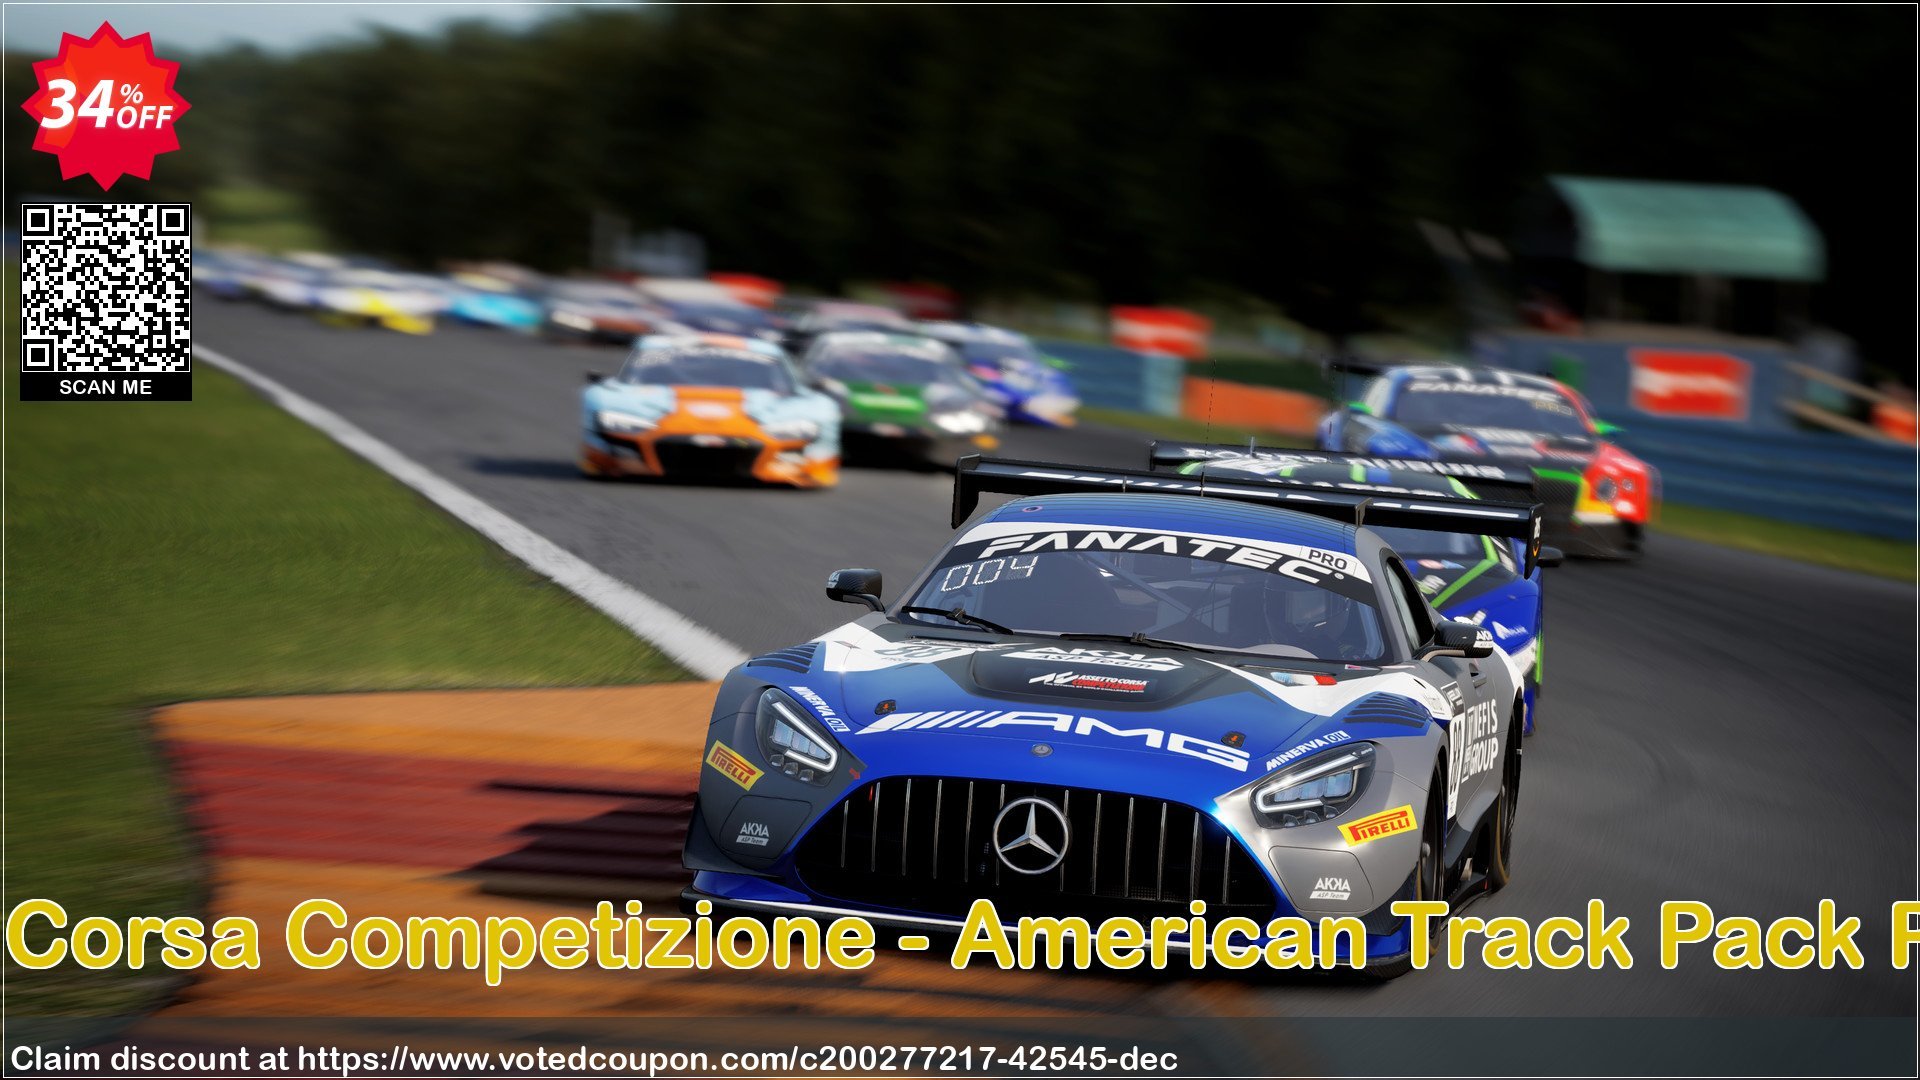 Assetto Corsa Competizione - American Track Pack PC - DLC Coupon Code May 2024, 34% OFF - VotedCoupon